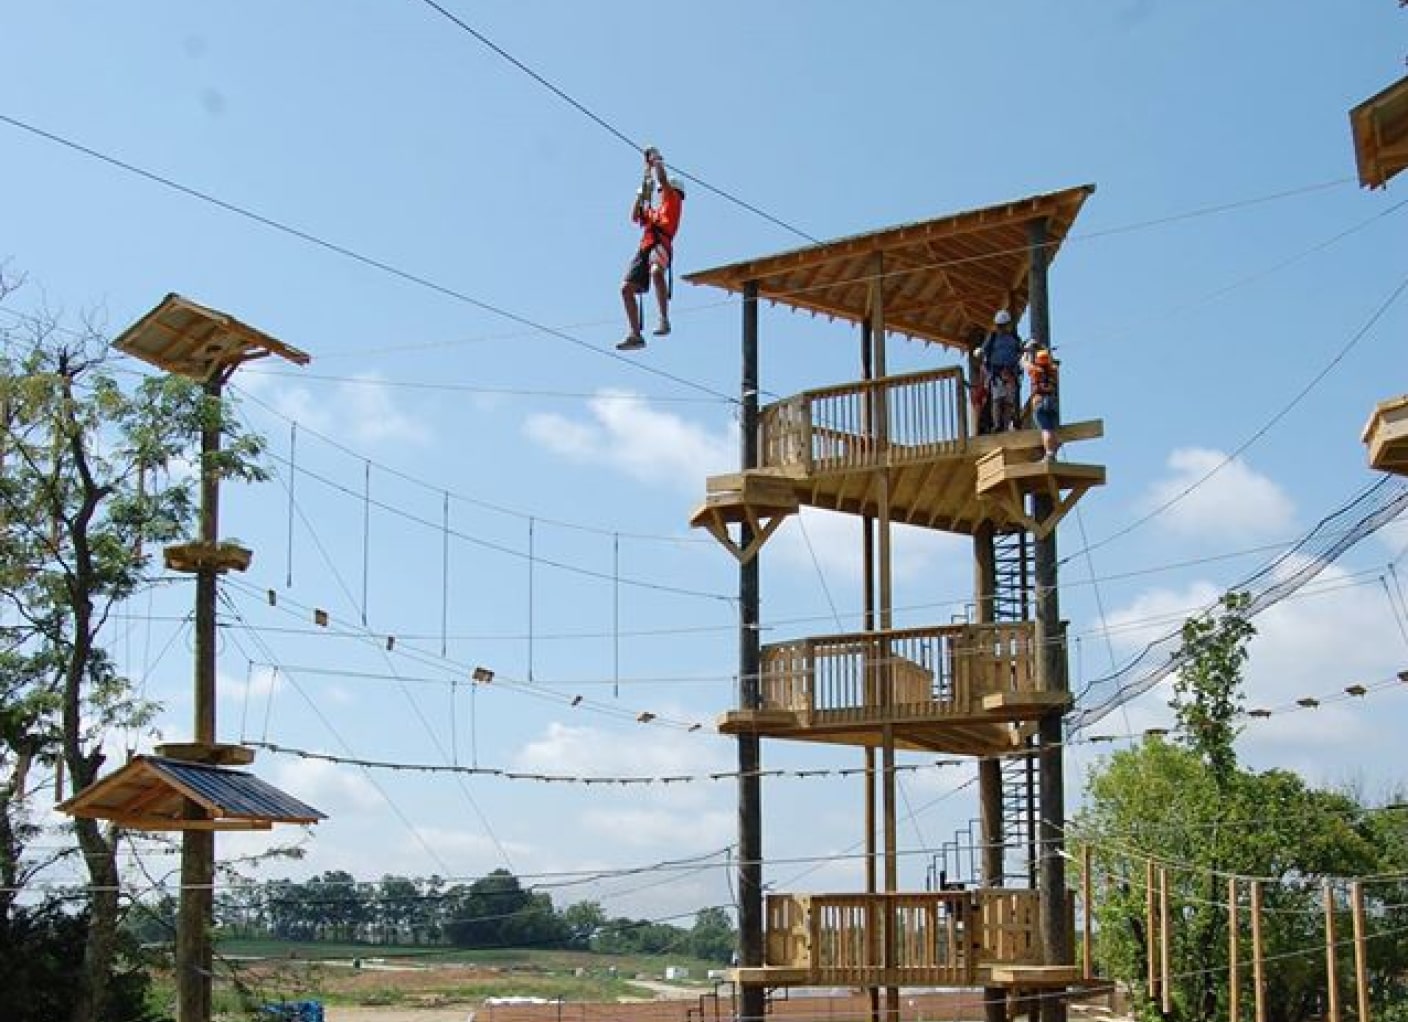 aerial challenge course at the ark encounter